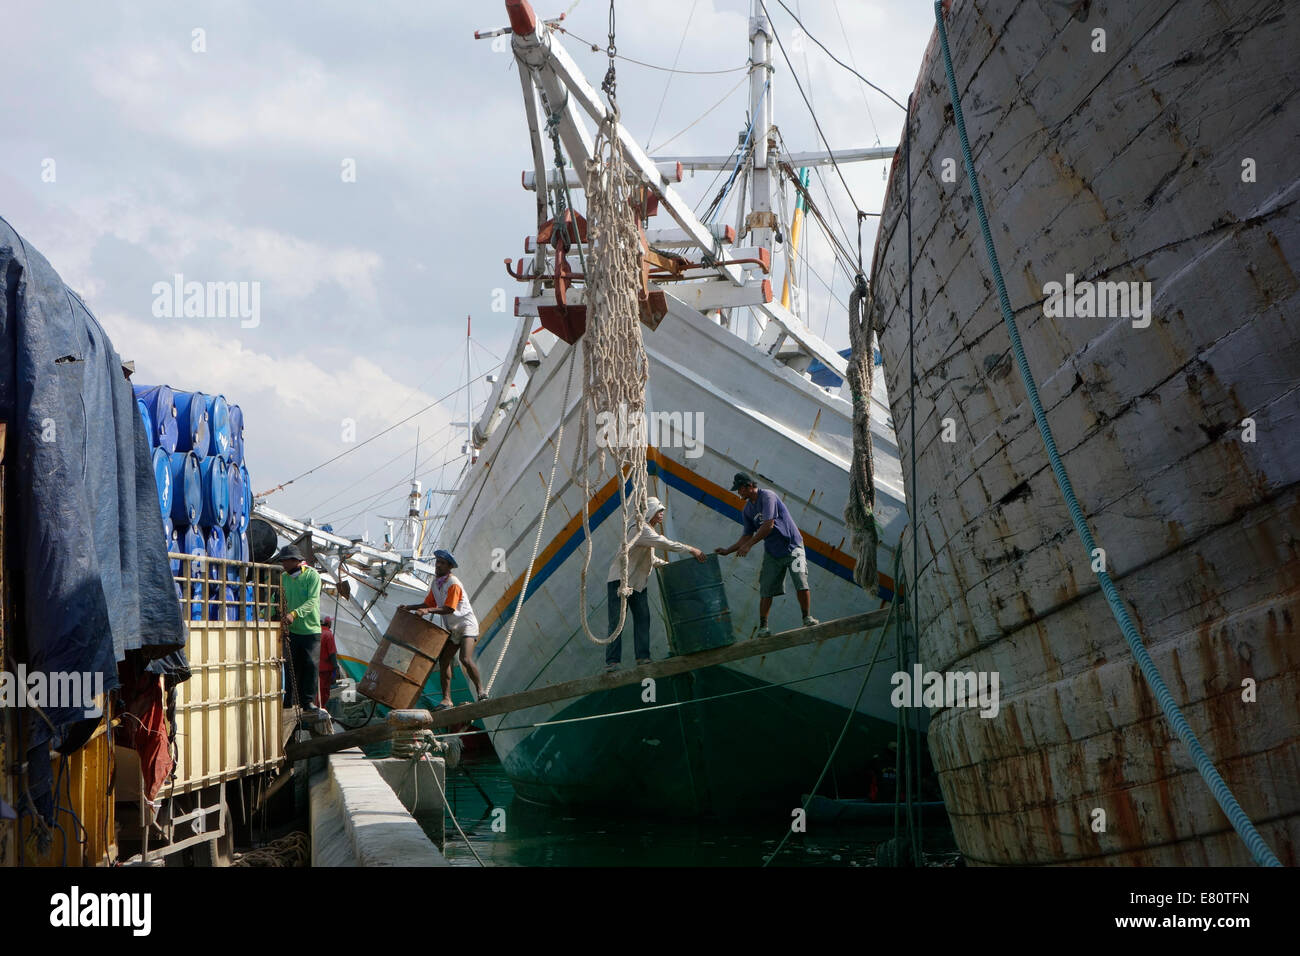 Men are loading the old boat with cargo for Borneo Stock Photo